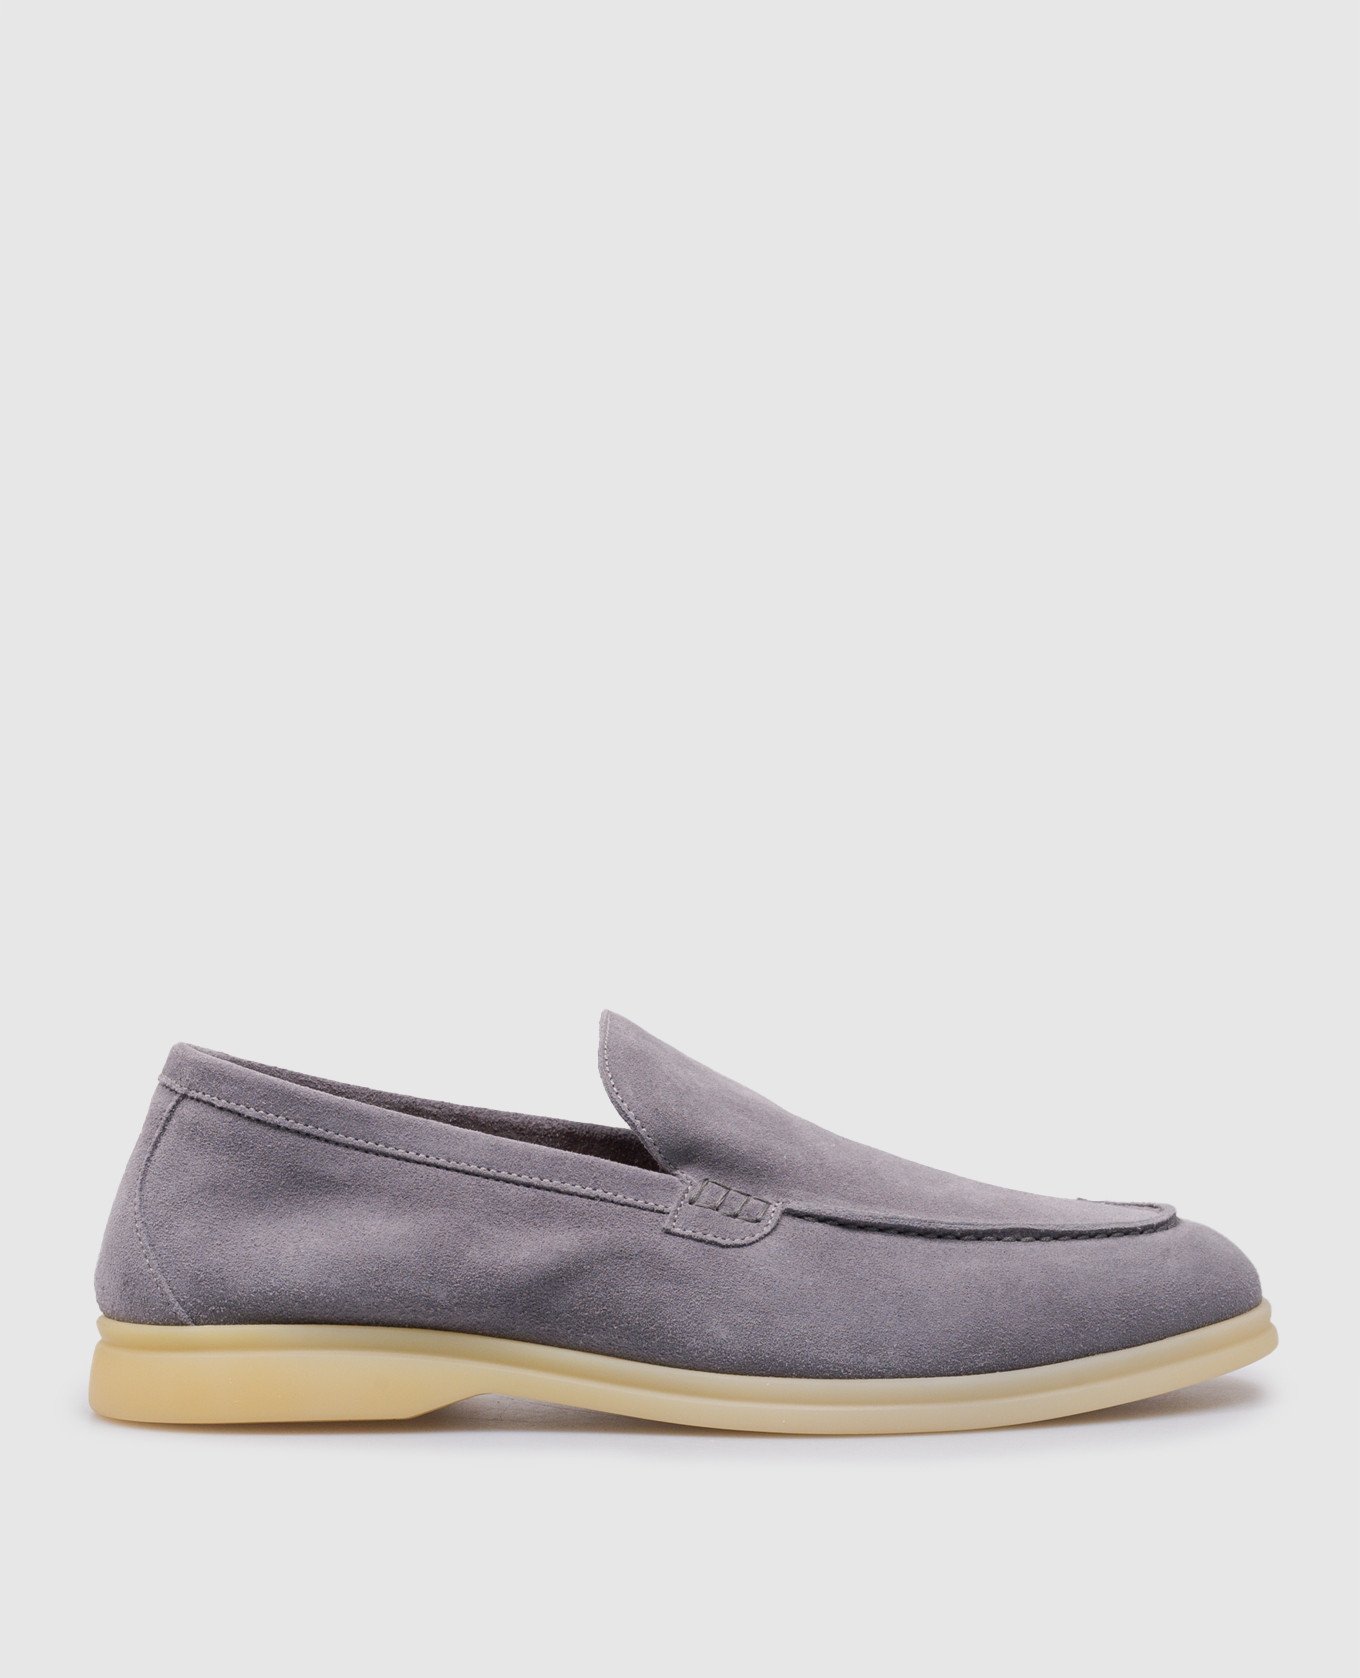 Felix gray suede loafers